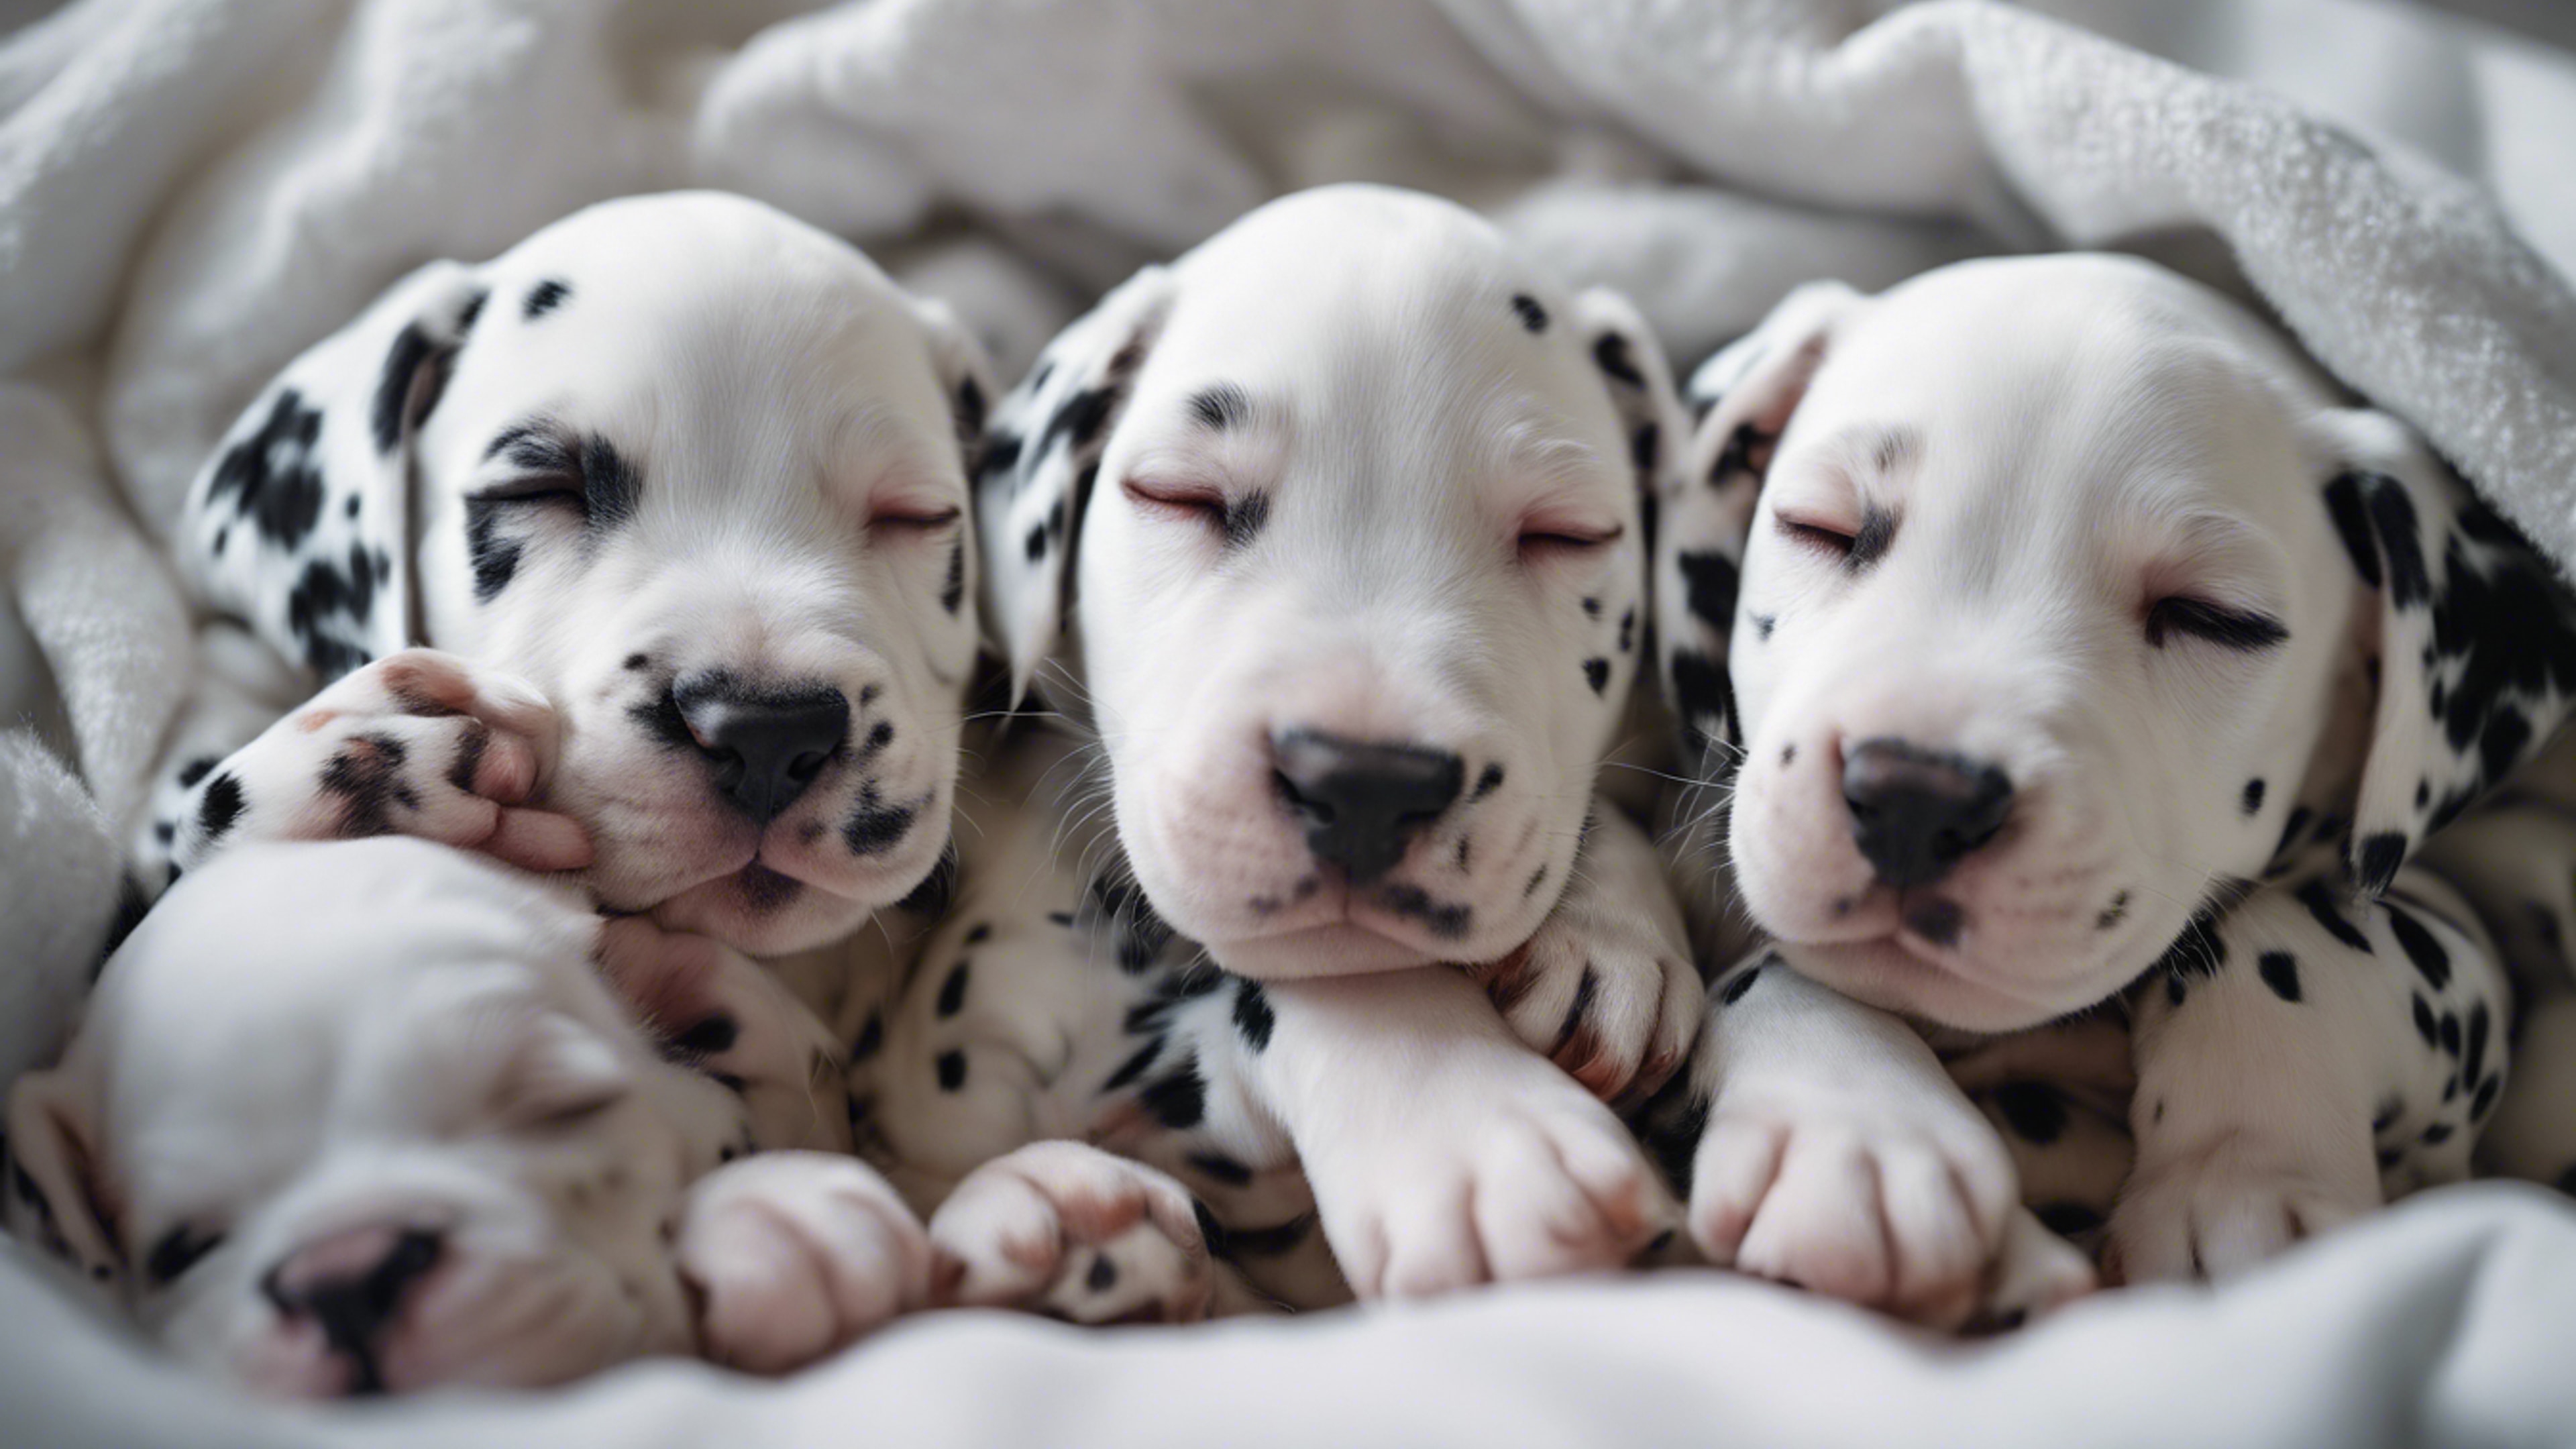 A cluster of sleeping Dalmatian puppies under a cozy white blanket in a nursery room. Hintergrund[4a5dc312c1f344509ca9]